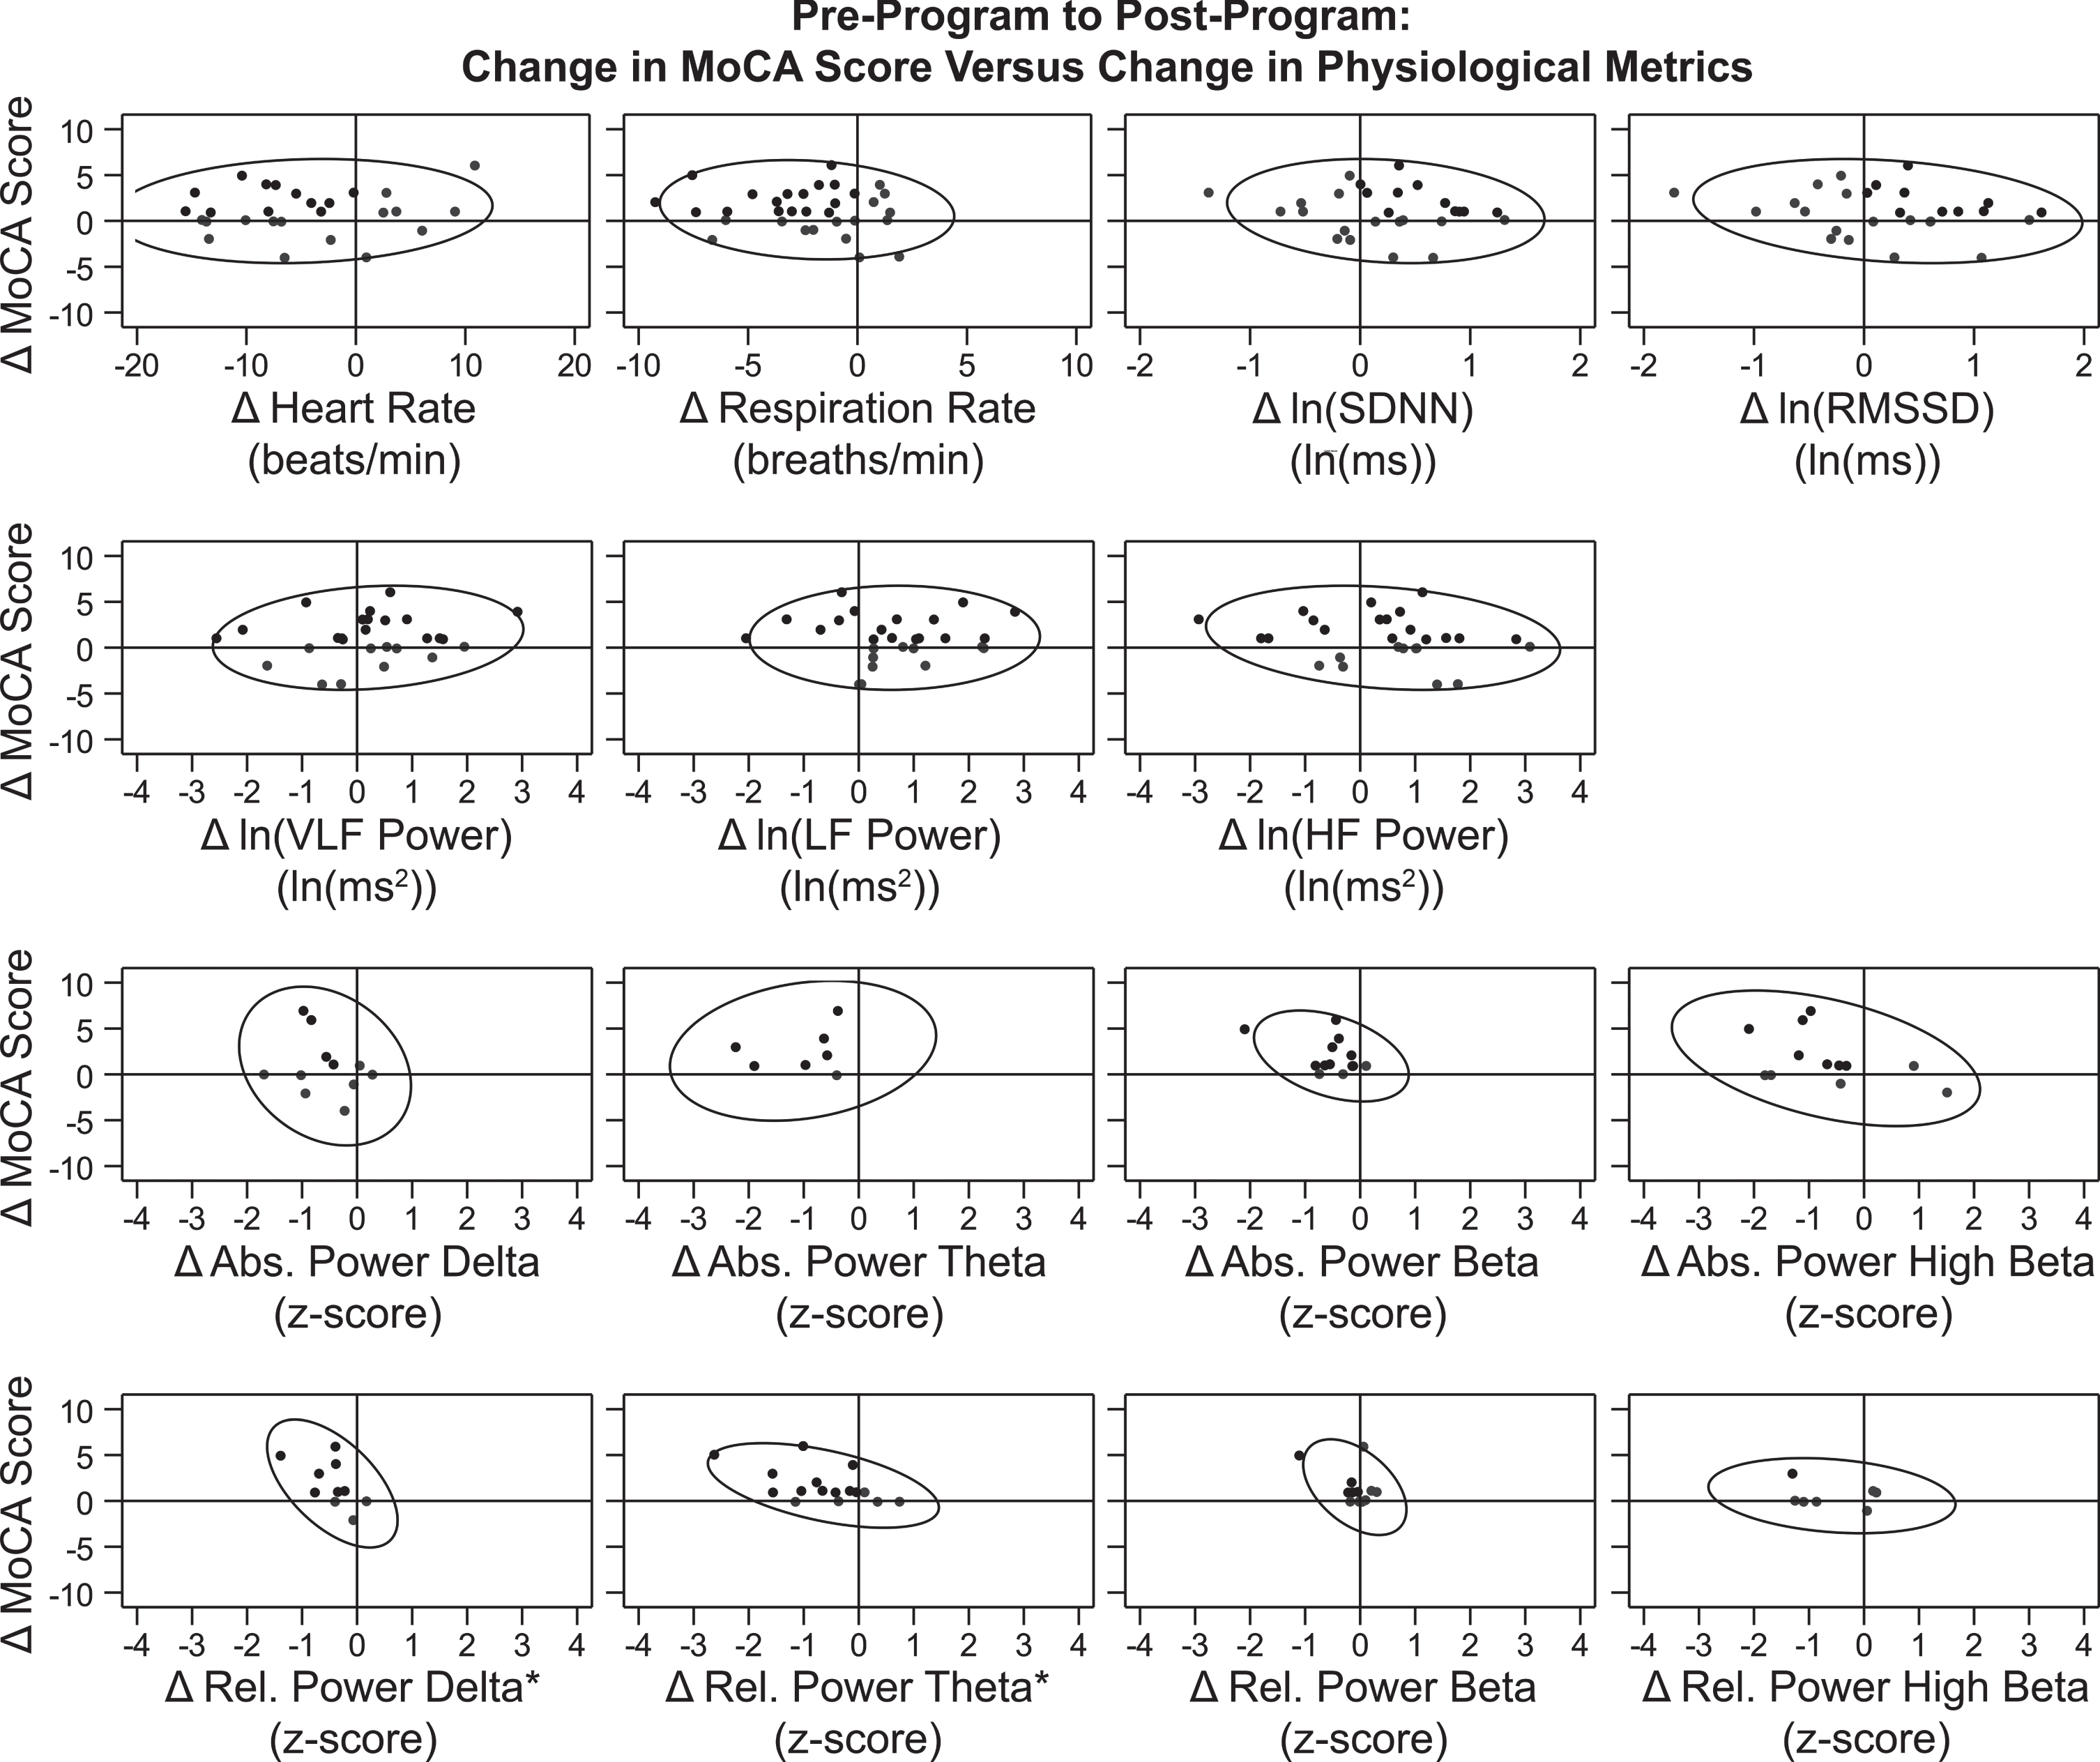 Correlation between Changes in MoCA Score and Physiological Metrics over the Treatment Period. Data points for participants’ change from pre-treatment to post-treatment (post minus pre) on MoCA score (Y-axis) versus each physiological metric (X-axis) are graphed. Reference lines are drawn at X = 0 and Y = 0, which divide the graph into quadrants. Points that demonstrate improvement in both graphed measures (where possible) are shown in black, while those that demonstrate no change or decline are shown in gray. For 12 of the 15 graphs, points in a single quadrant are black and points in the other three quadrants are gray, because an improvement was defined for both the X-axis and Y-axis measures. For change in MoCA score, an improvement was an increase in score. For change in heart rate, respiration rate, and all eight QEEG metrics, an improvement was a decrease. For the HRV metrics ln(SDNN) and ln(RMSSD), an improvement was an increase. For the three graphs representing change in ln(VLF power), ln(LF power), and ln(HF power), two quadrants (top left and top right) contain black points and two quadrants (bottom left and bottom right) contain gray dots because an improvement in the X-axis measure was not specifically defined during normal breathing conditions. 90% prediction ellipses are also graphed to aid in relationship visualization. The two graphs representing change in relative power of delta and relative power of theta (the bottom left panels) are indicated with an * symbol because there was a significant linear correlation found between change in MoCA score over the treatment period and change in the physiological metric (values from Table 5). In both cases, the association between these variables was a negative linear correlation. This indicates that the increase (improvement) in participants’ MoCA scores over the treatment period was associated with a decrease (improvement; closer to z = 0) in these QEEG |z-scores|.